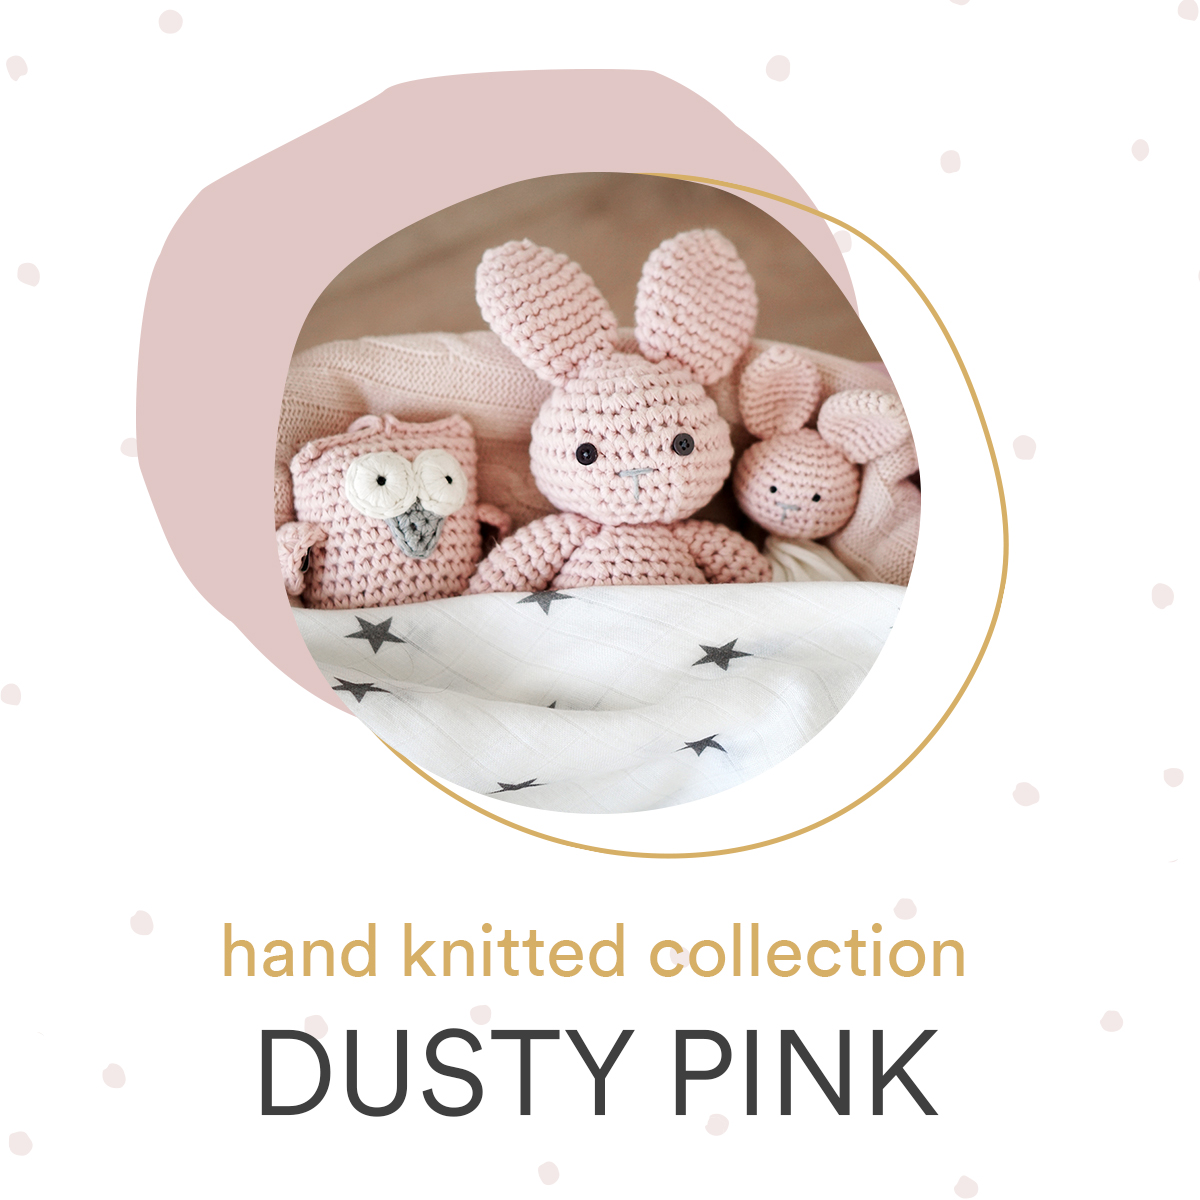 Hand knitted collection - Dusty pink